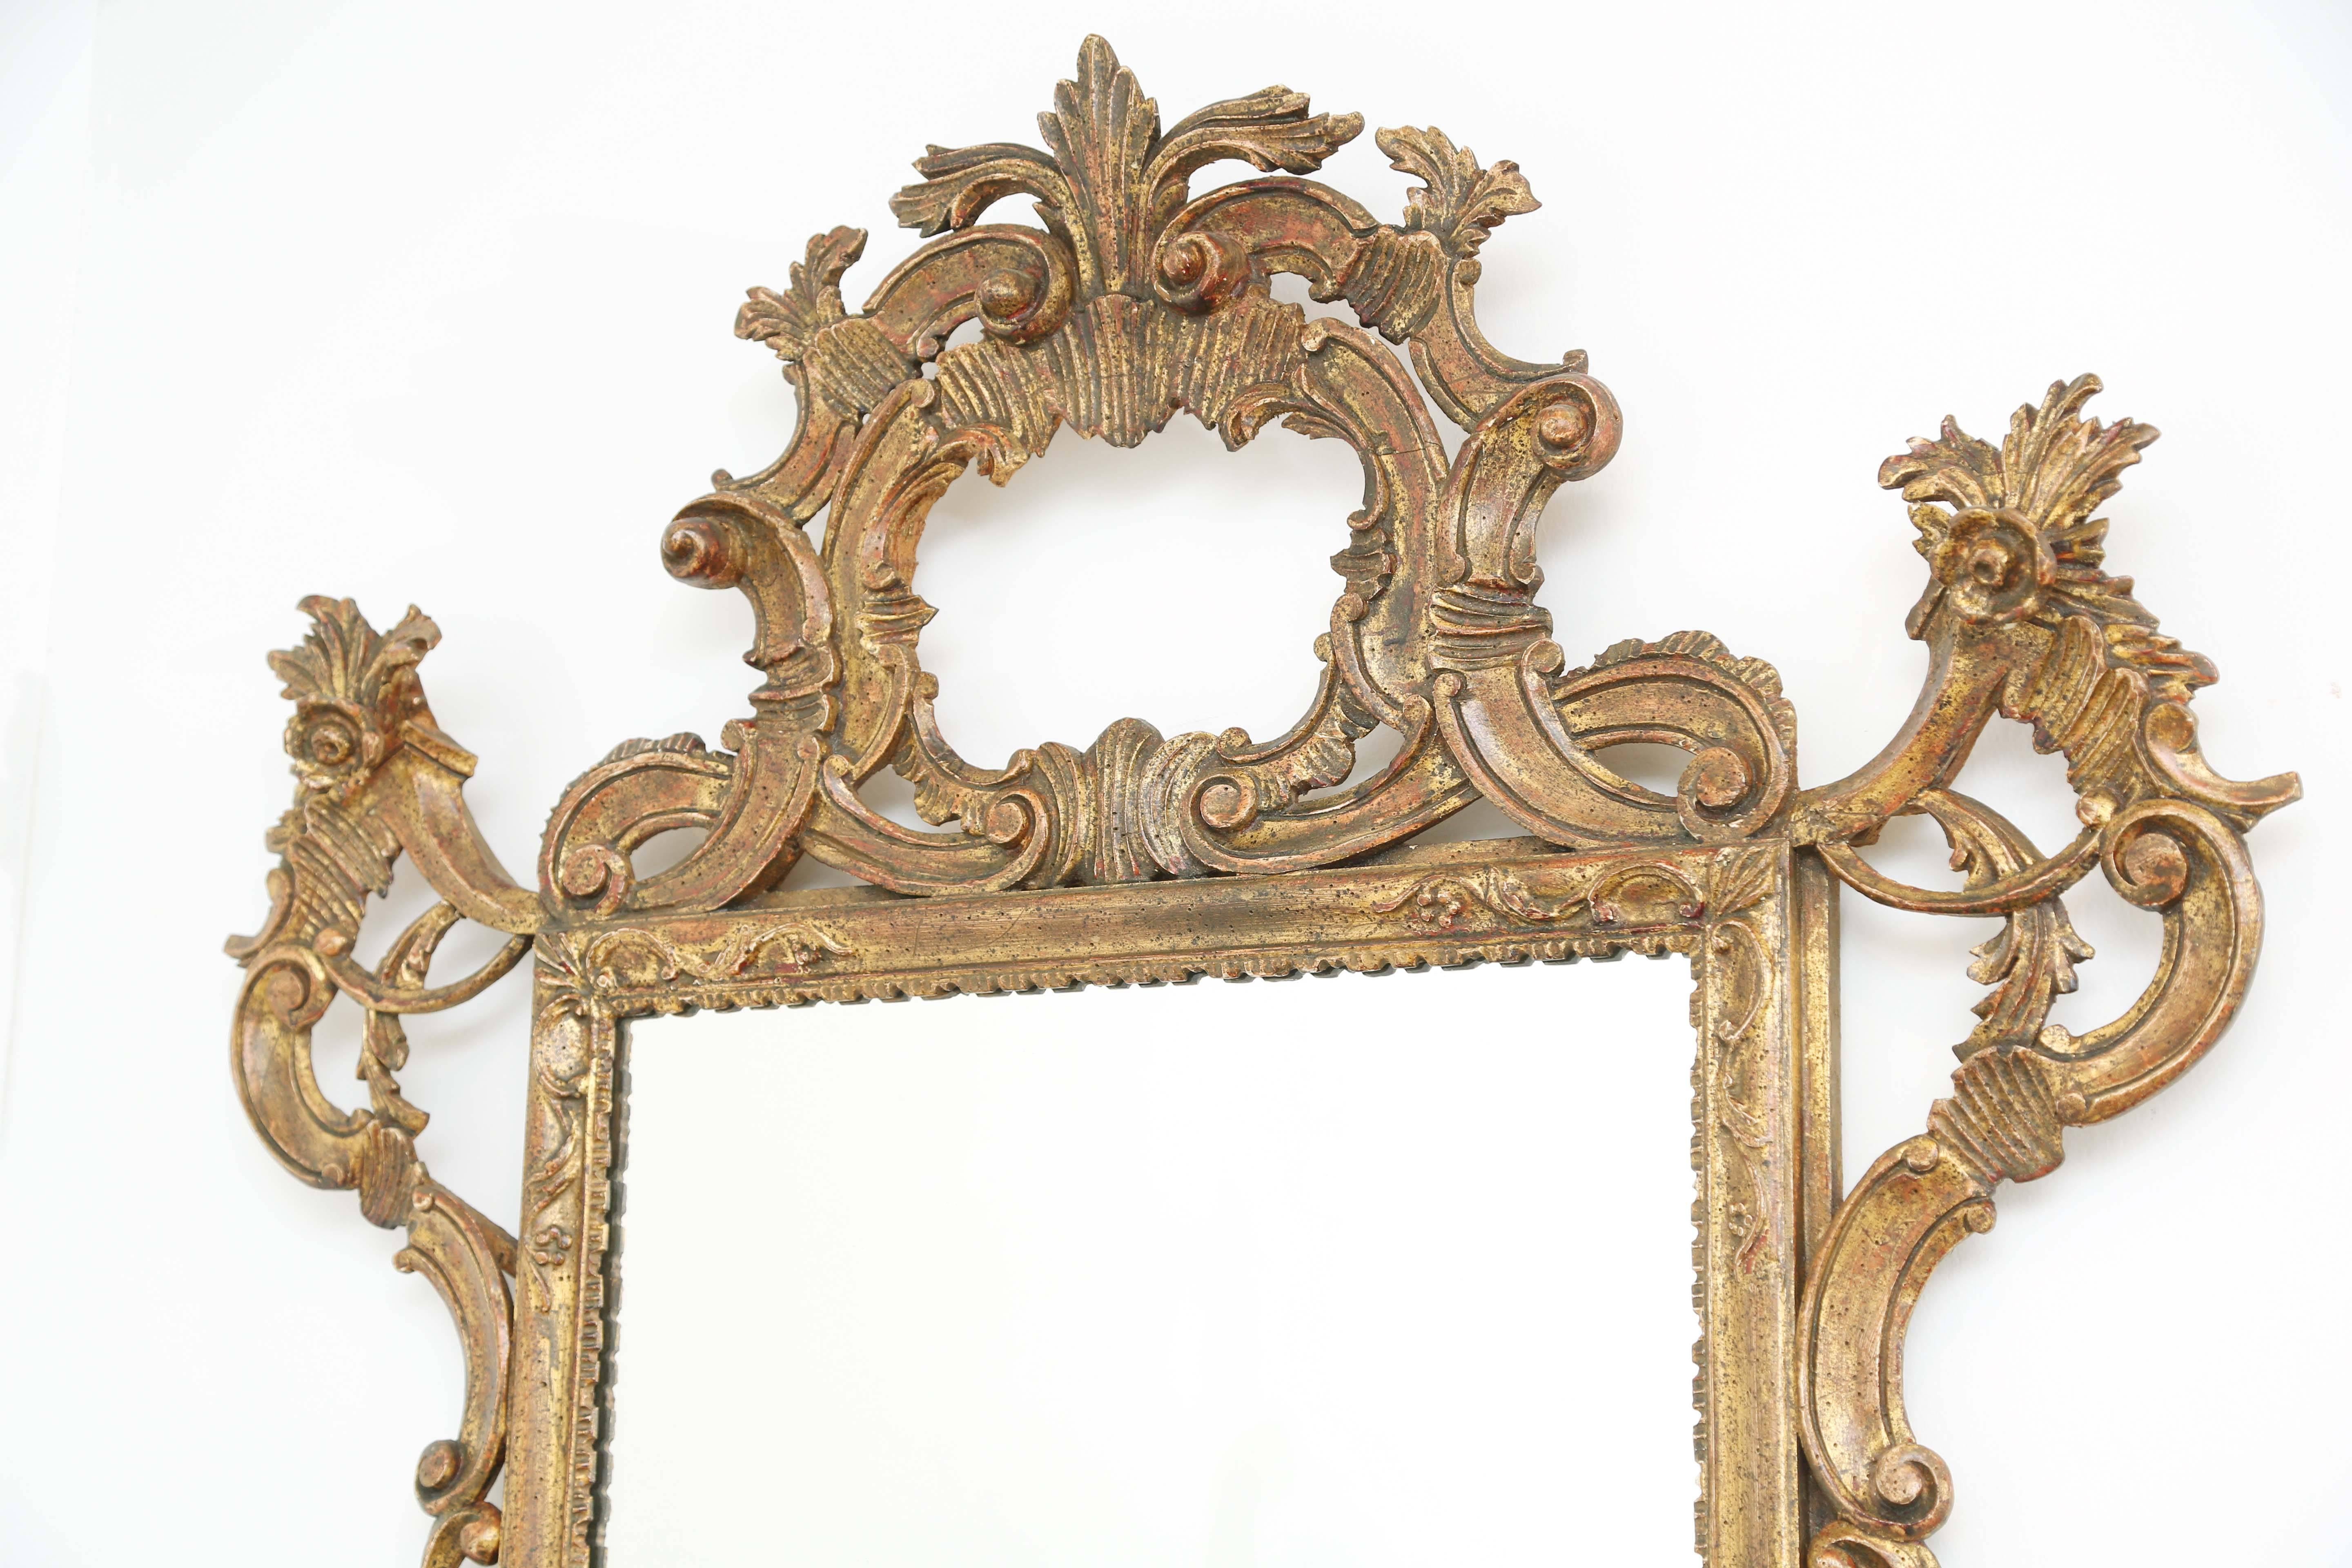 Wall mirror, having a rectangular gadrooned frame, surmounted by a pierced pediment of elaborate foliate scrollwork, accented by coquillage and rosettes, with similar pierced embellishments on its corners and base.